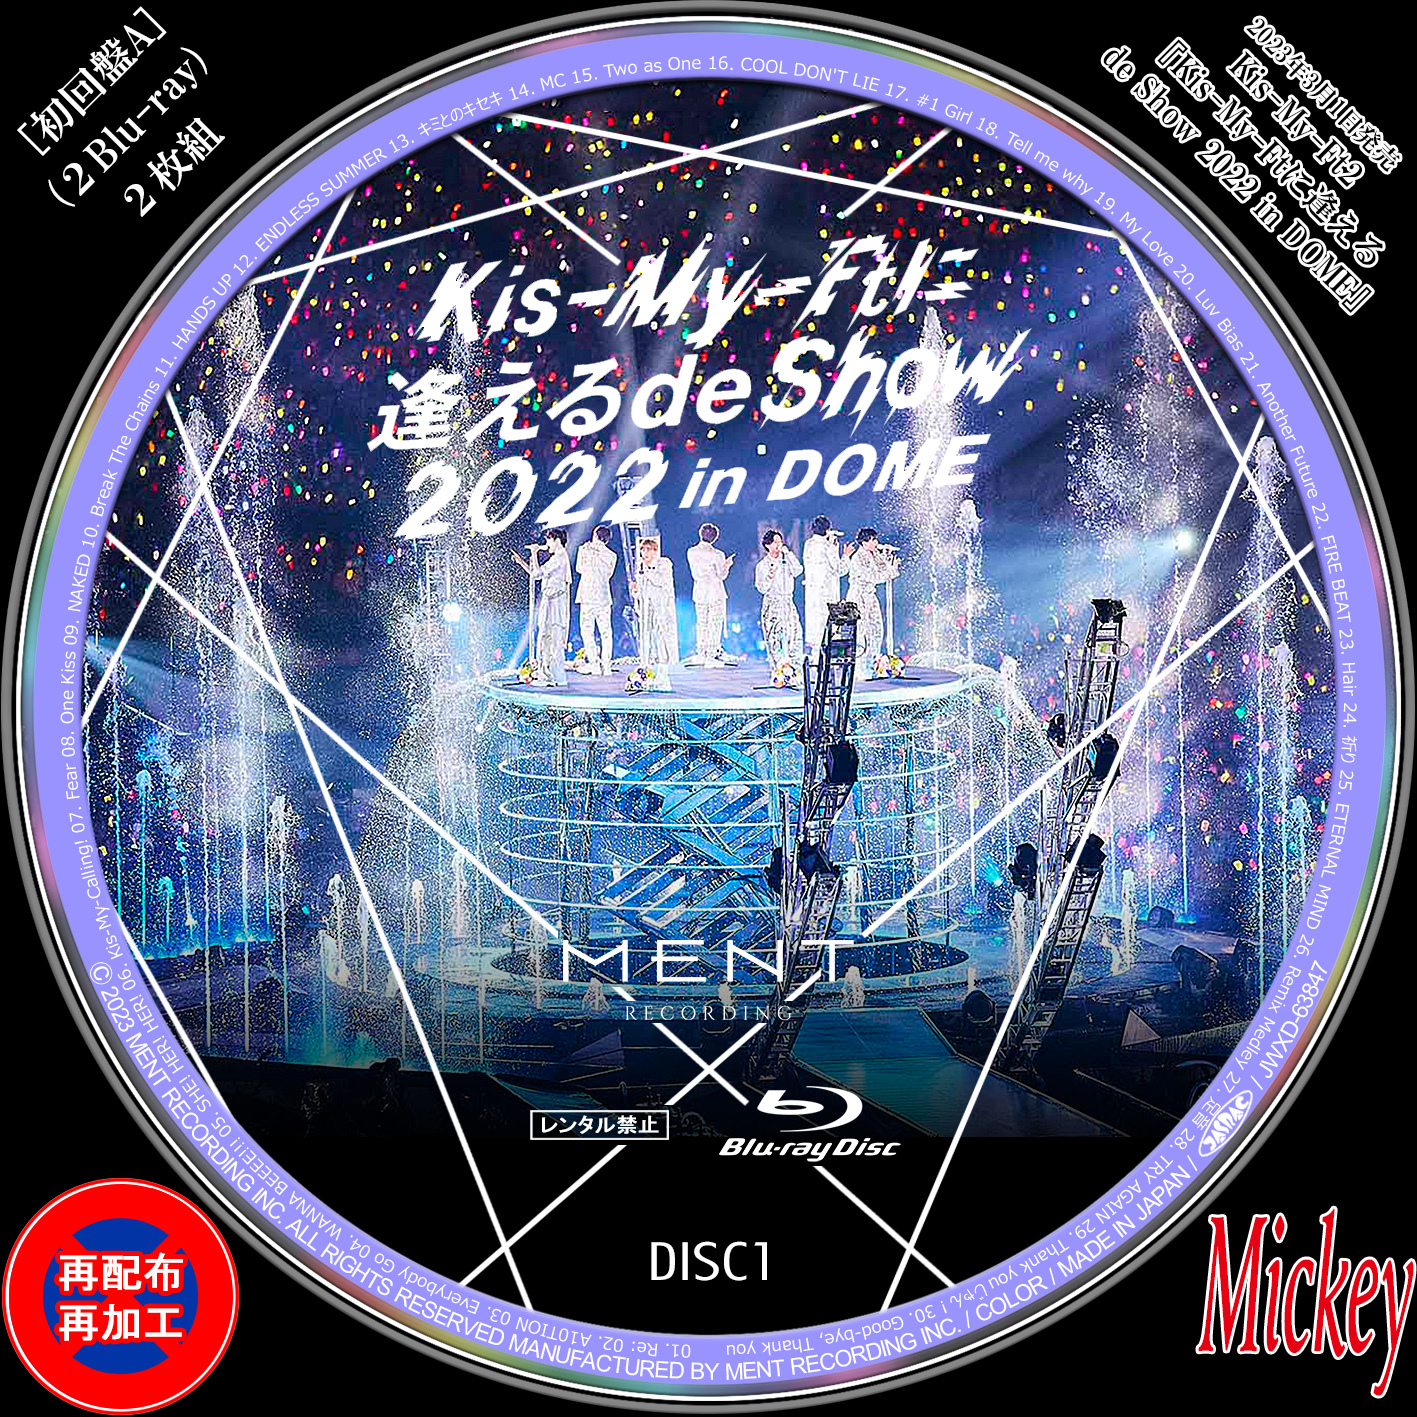 Kis-My-Ftに逢える de Show 2022 in DOME 通常盤